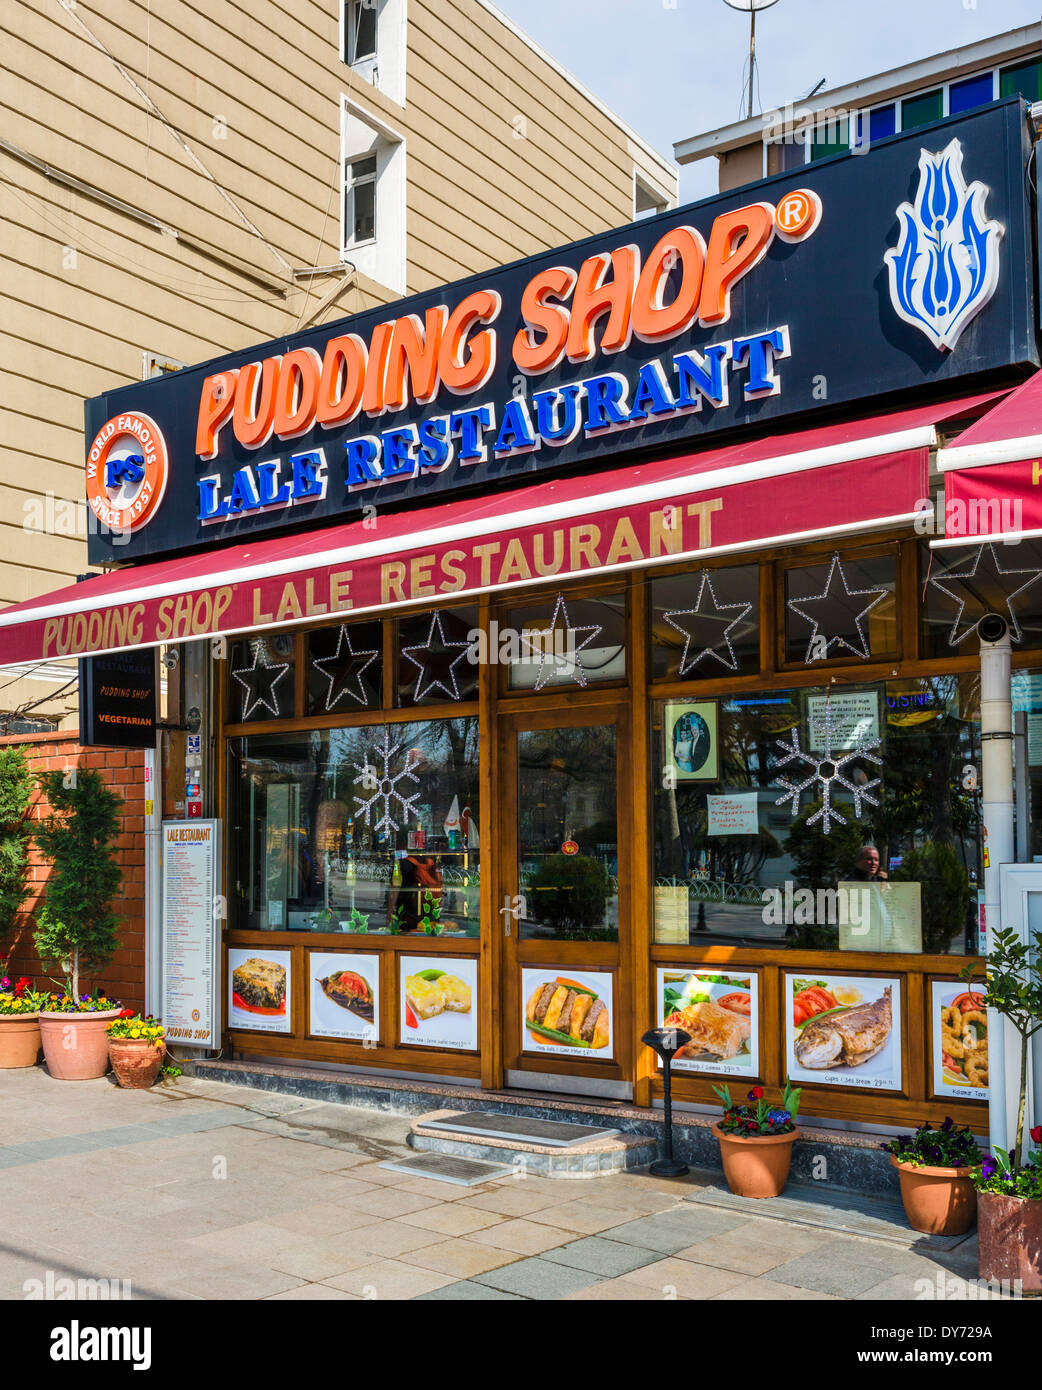 The famous Pudding Shop (Lale Restaurant) on Divan Yolu Caddesi in the Sultanahmet district, Istanbul,Turkey Stock Photo